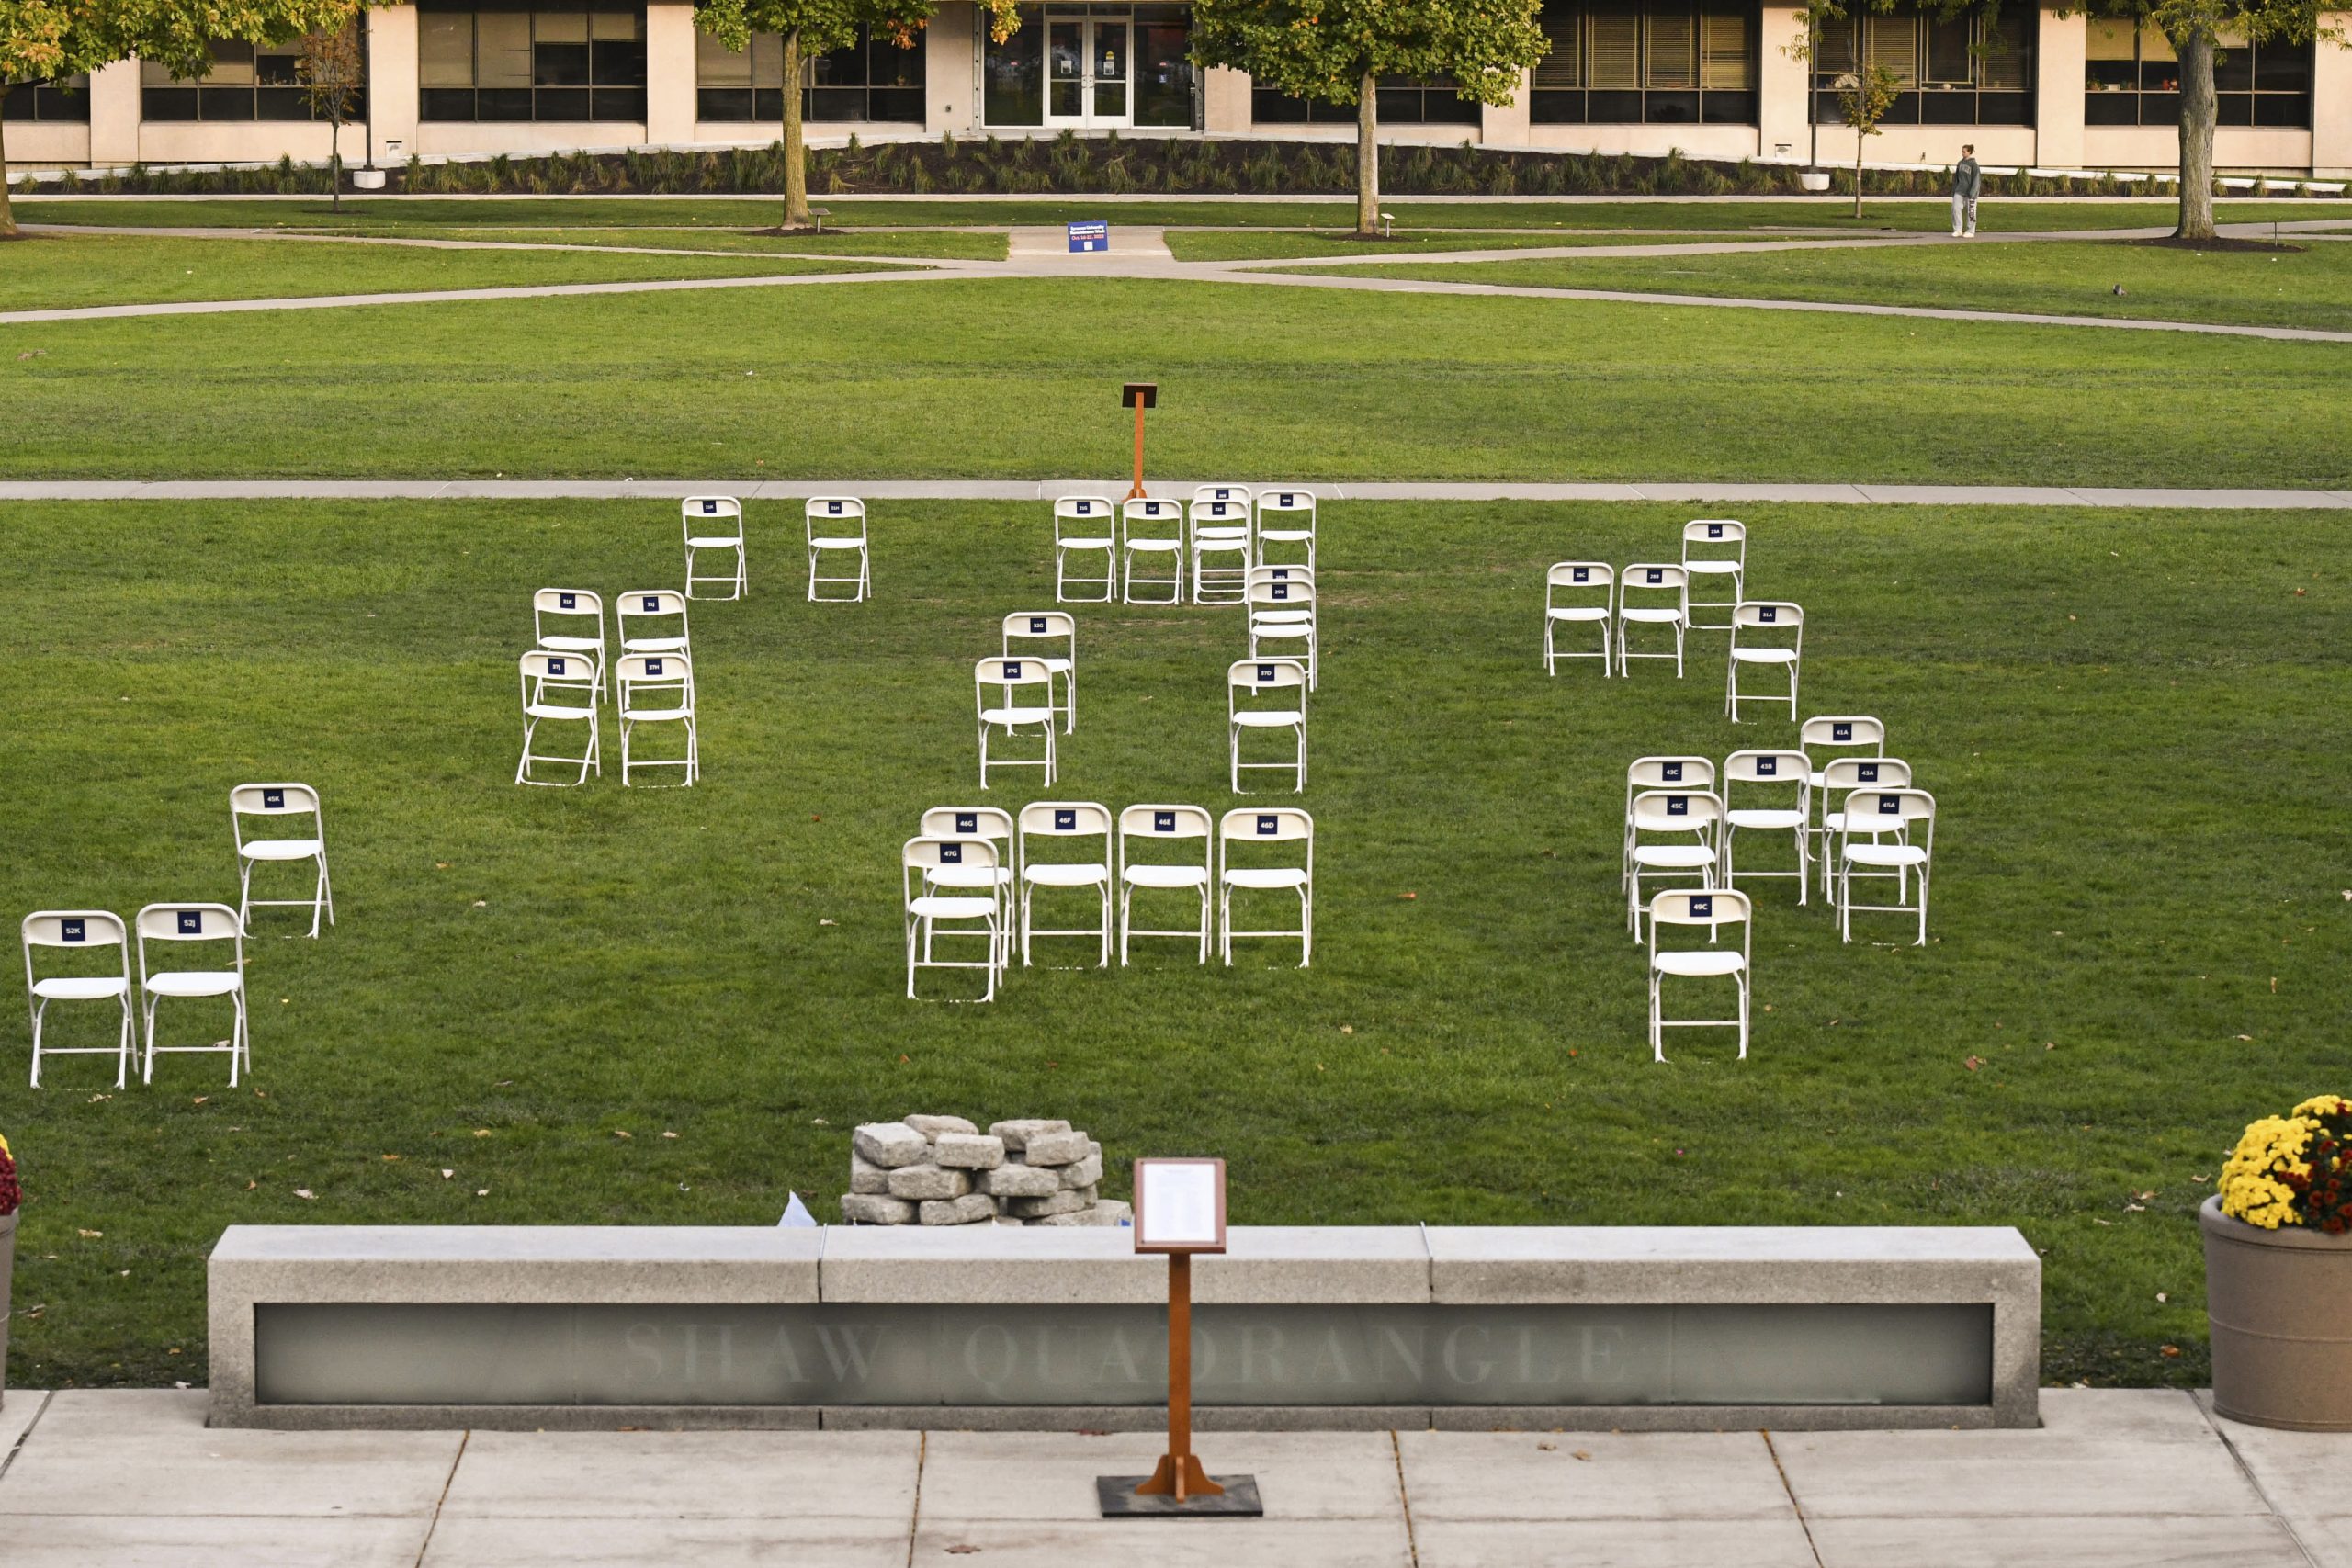 Thiry-five chairs, representing the 35 Syracuse students who lost their life in the bombing of Pan Am Flight 103, are lined up in the Quad corresponding to where each student sat on the plane. (Photo by Cole Bambini | The Newshouse)